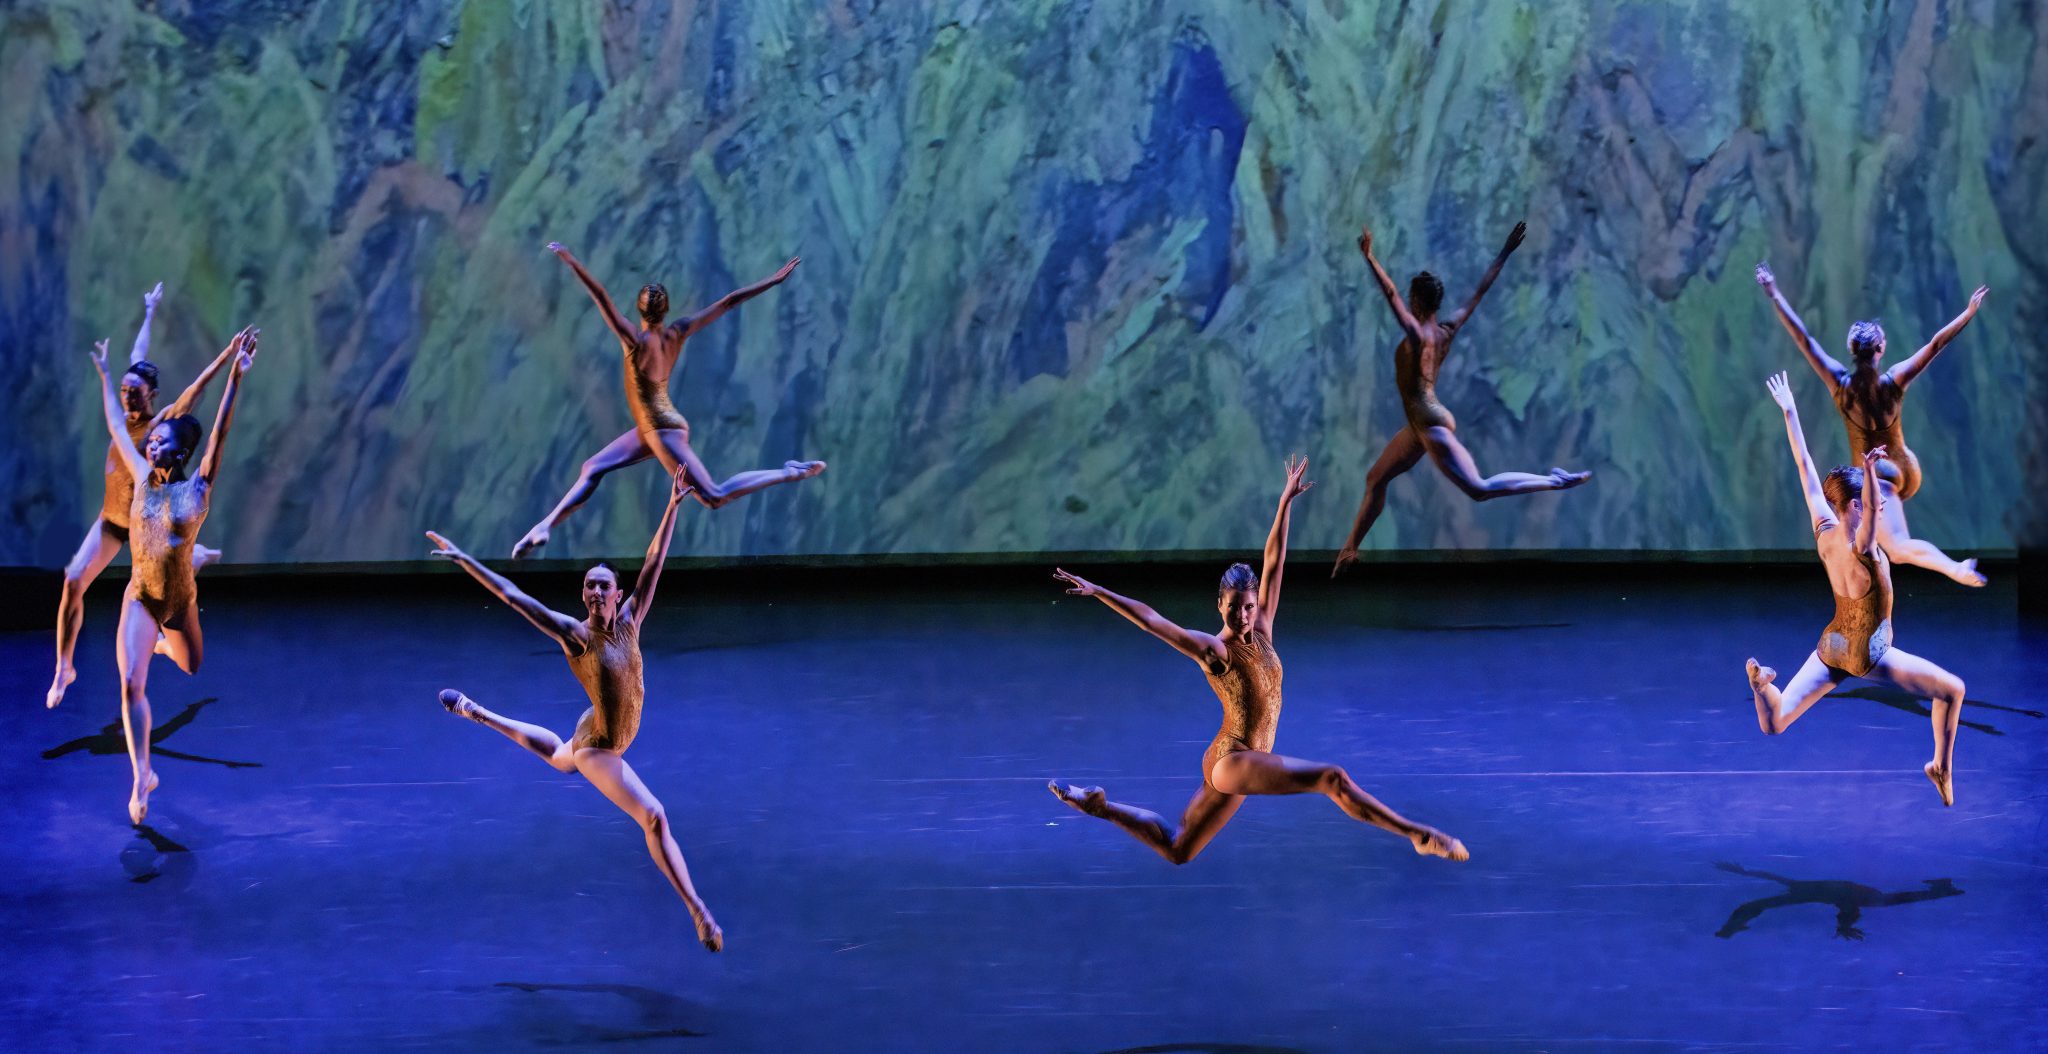 Raiford Rogers ballet dancers in perfect unison mid-jump against a painted backdrop, exhibiting the artistry and athleticism of a dance performance.